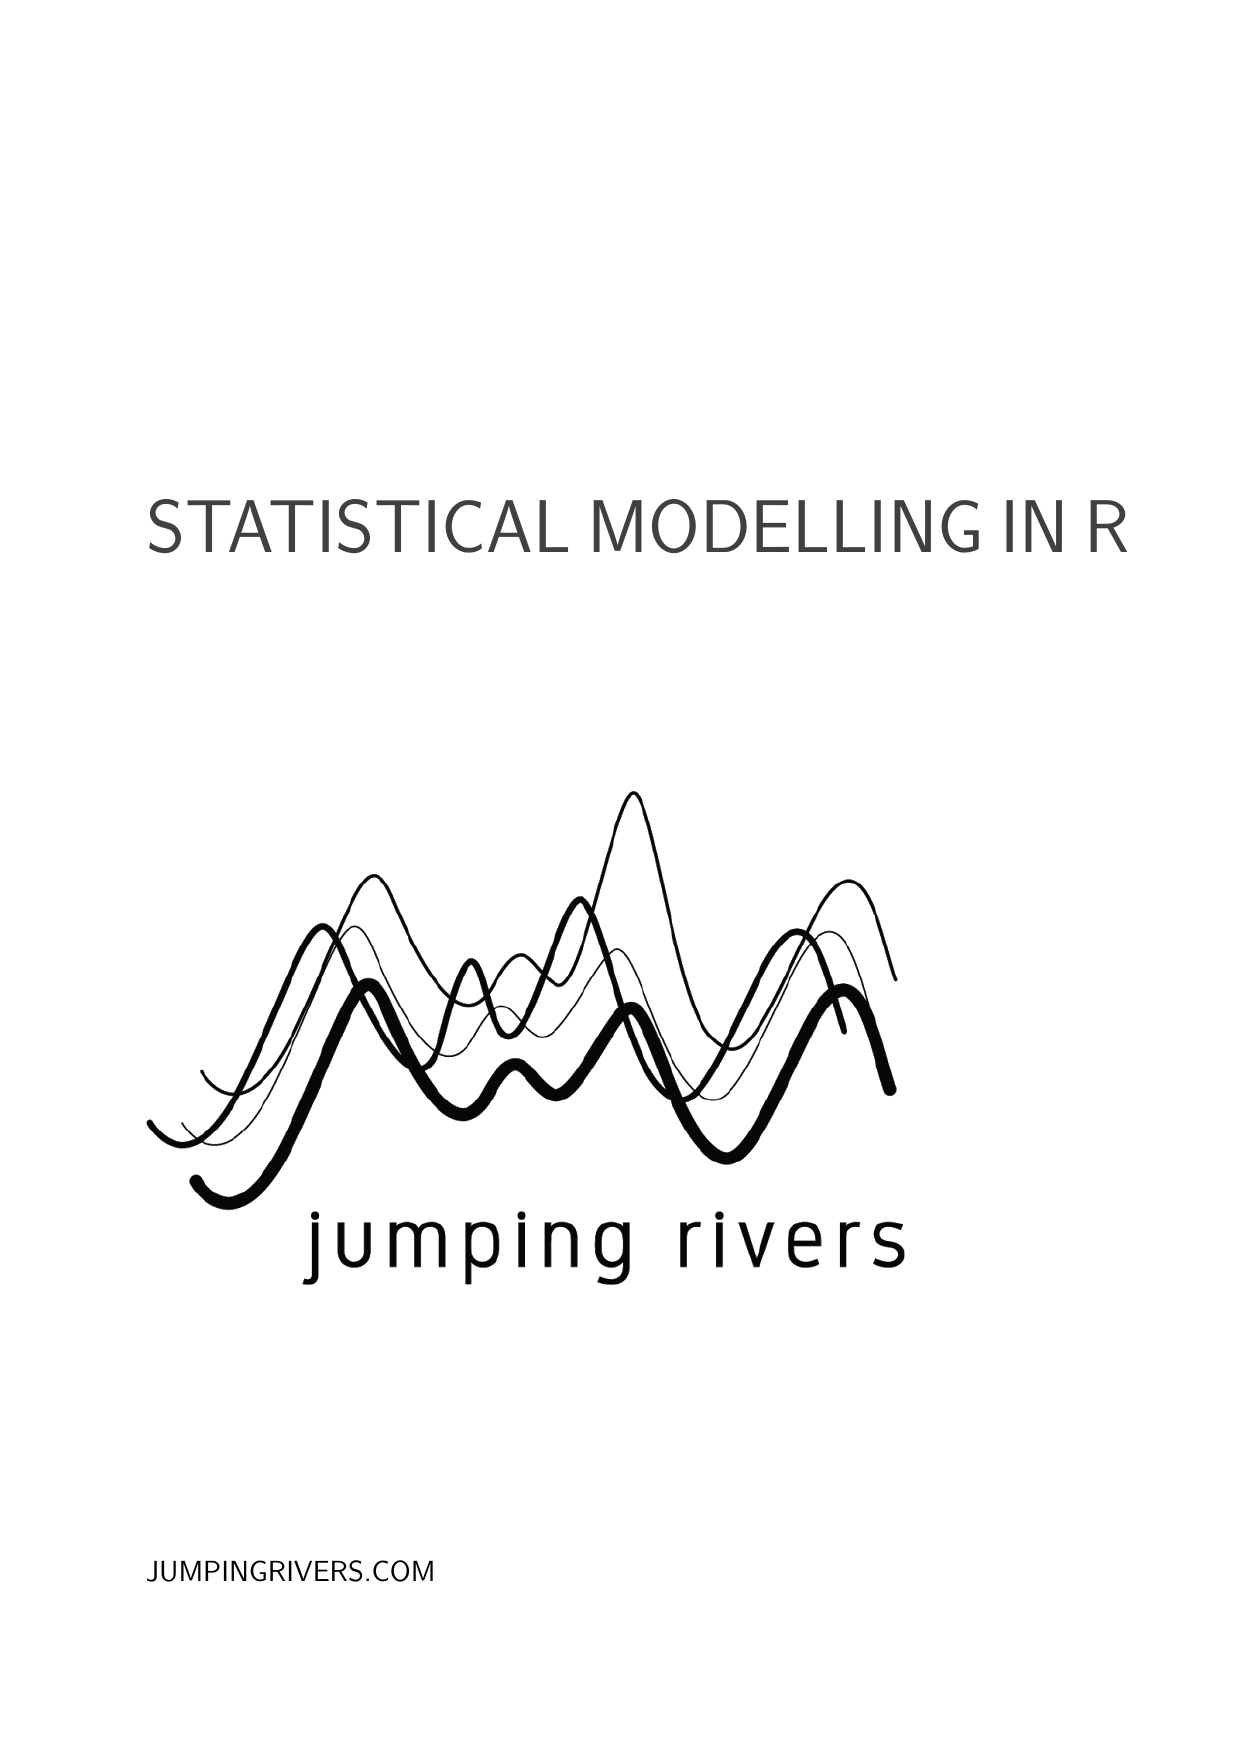 Example course material for 'Statistical Modelling with R